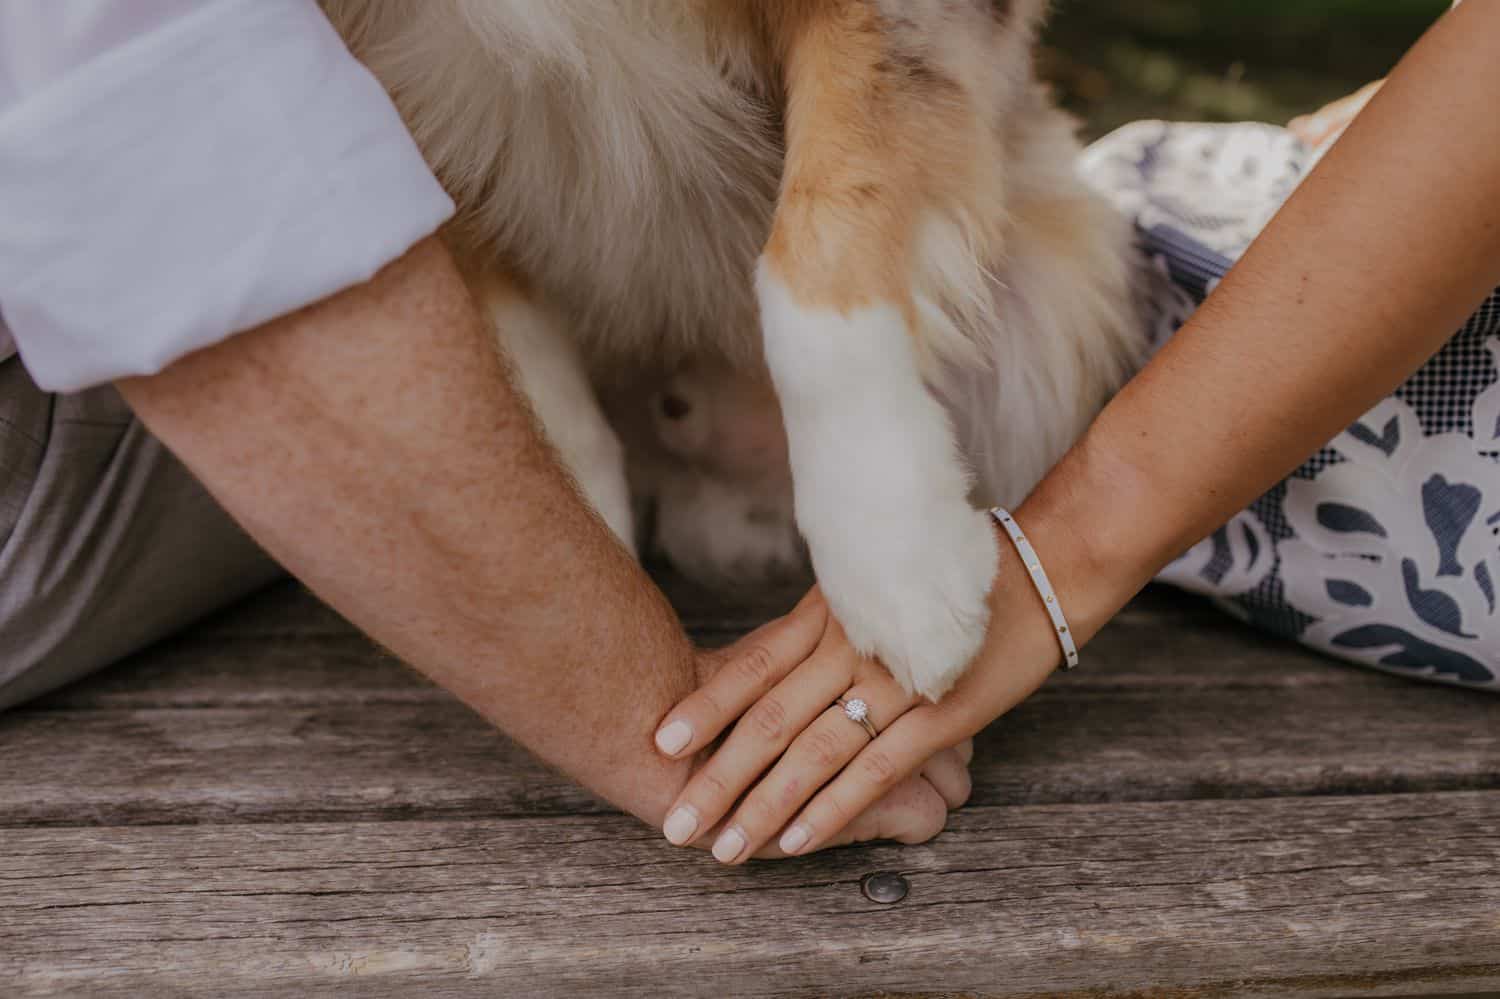 See how dog photography can enhance your portrait and wedding images. Your clients will love adding their furry family member to their next session!